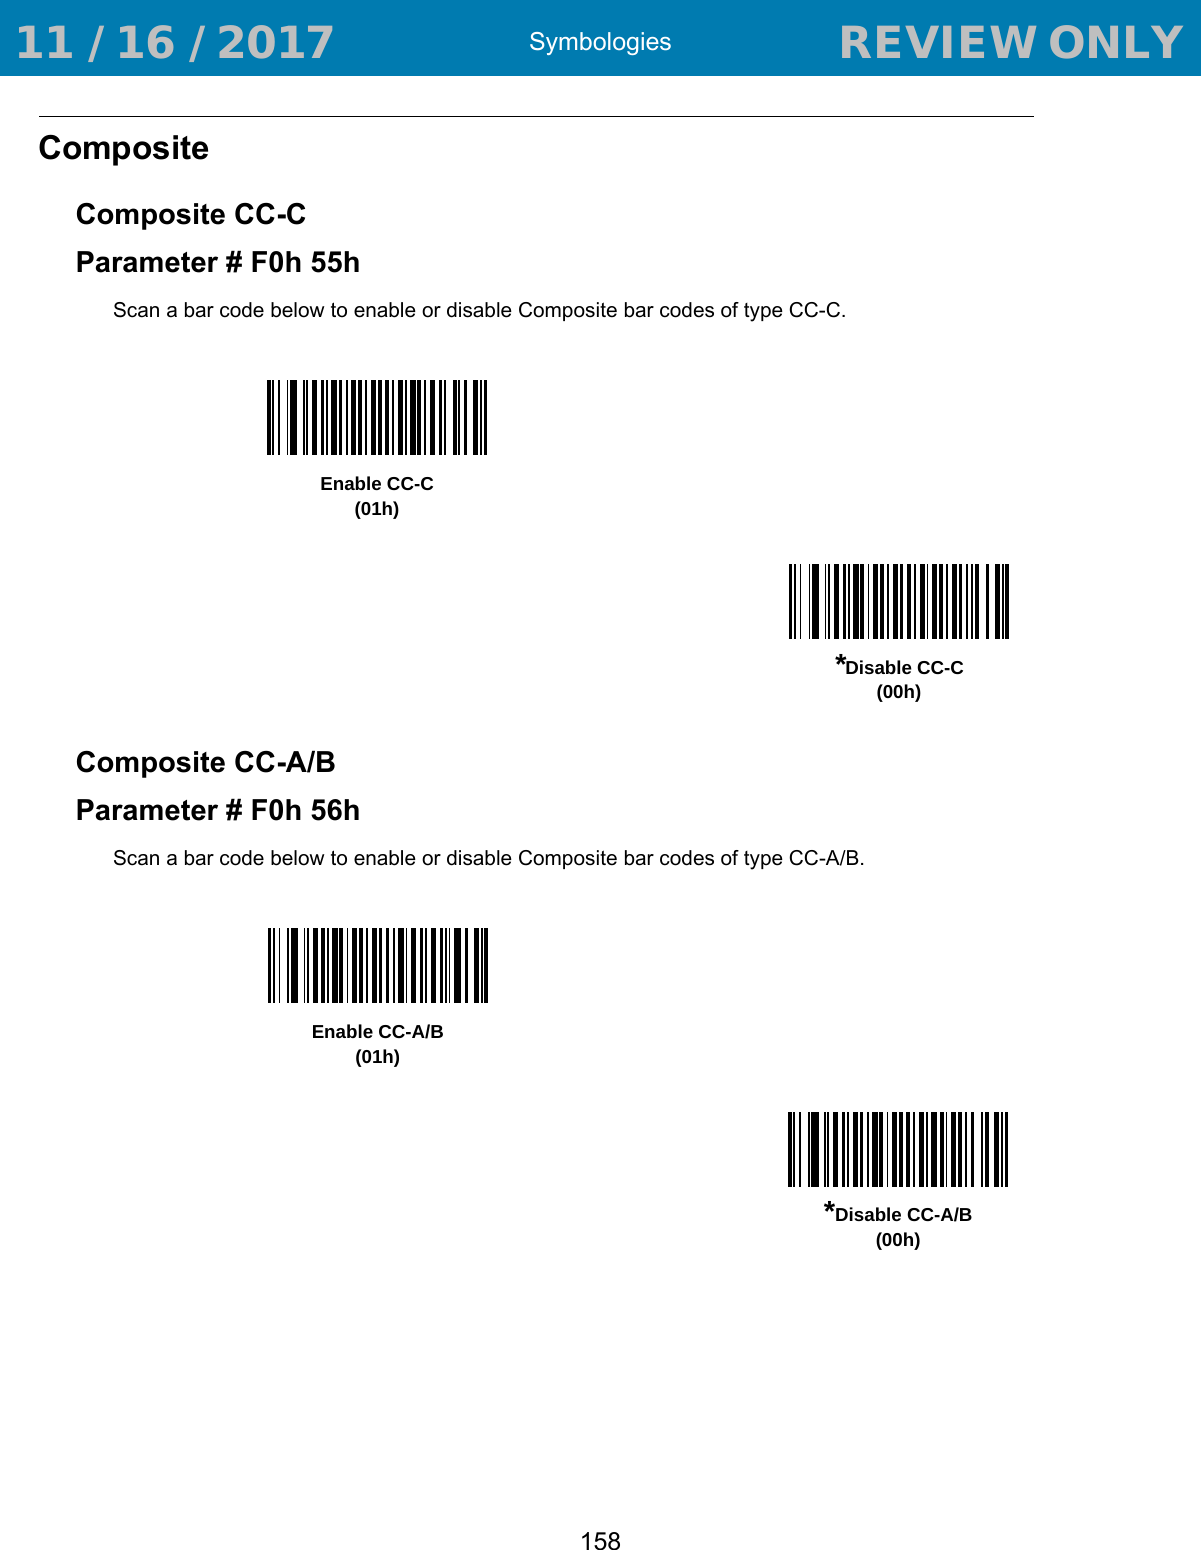 Symbologies158Composite Composite CC-CParameter # F0h 55hScan a bar code below to enable or disable Composite bar codes of type CC-C. Composite CC-A/BParameter # F0h 56hScan a bar code below to enable or disable Composite bar codes of type CC-A/B. Enable CC-C(01h)*Disable CC-C(00h)Enable CC-A/B(01h)*Disable CC-A/B(00h) 11 / 16 / 2017                                  REVIEW ONLY                             REVIEW ONLY - REVIEW ONLY - REVIEW ONLY